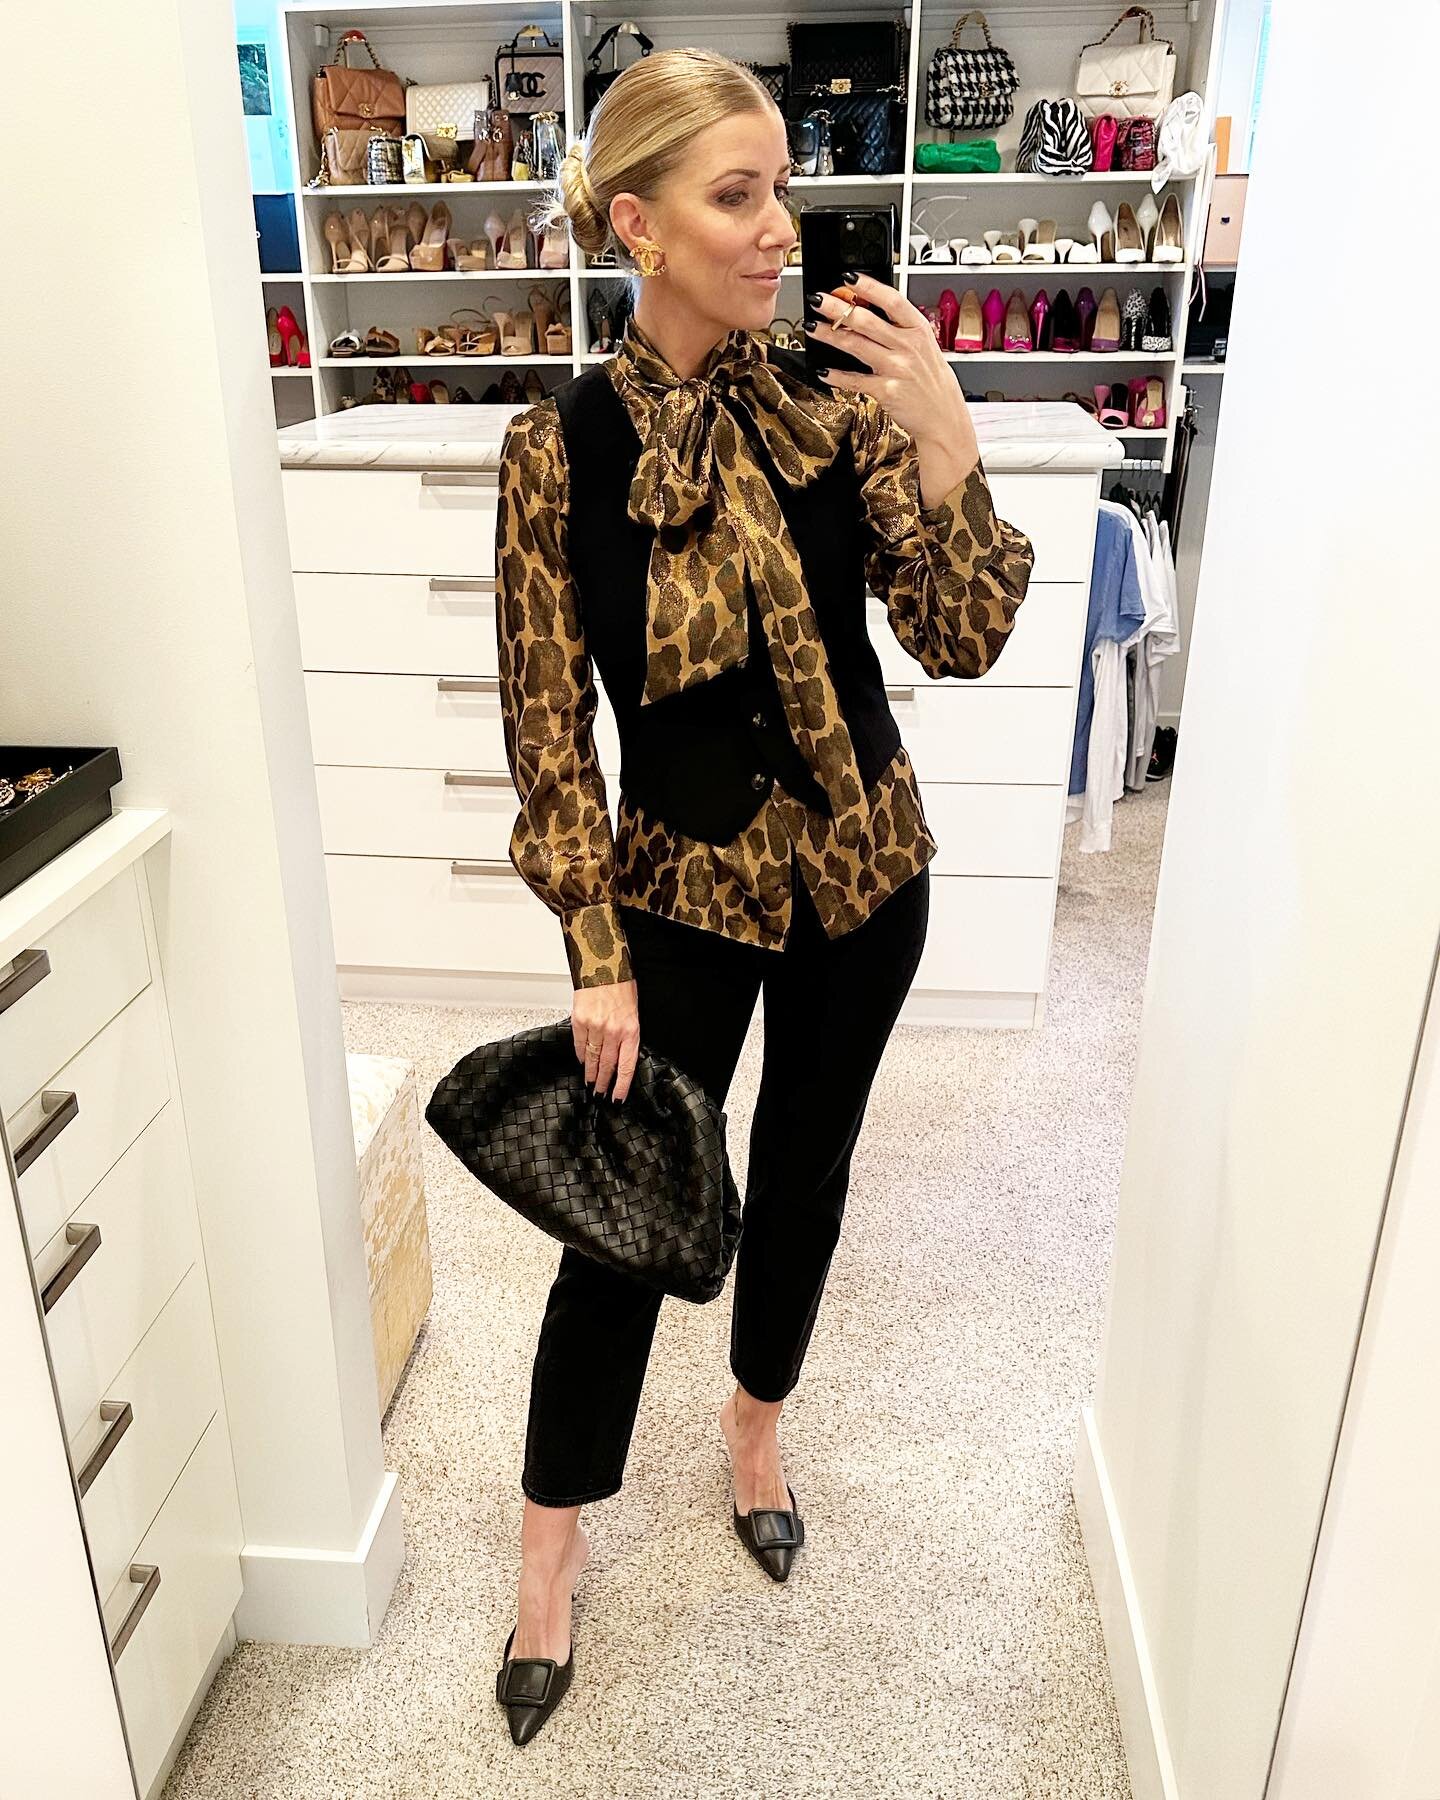 Date night with my @jb_homedecorandgifts &hellip; Xo

Shoes- Manolos bought consignment 
Jeans- Zara
Blouse- Michael Kors Collection bought consignment 
Vest- Aritzia
Earrings- CC bought consignment 
Bag- Bottega